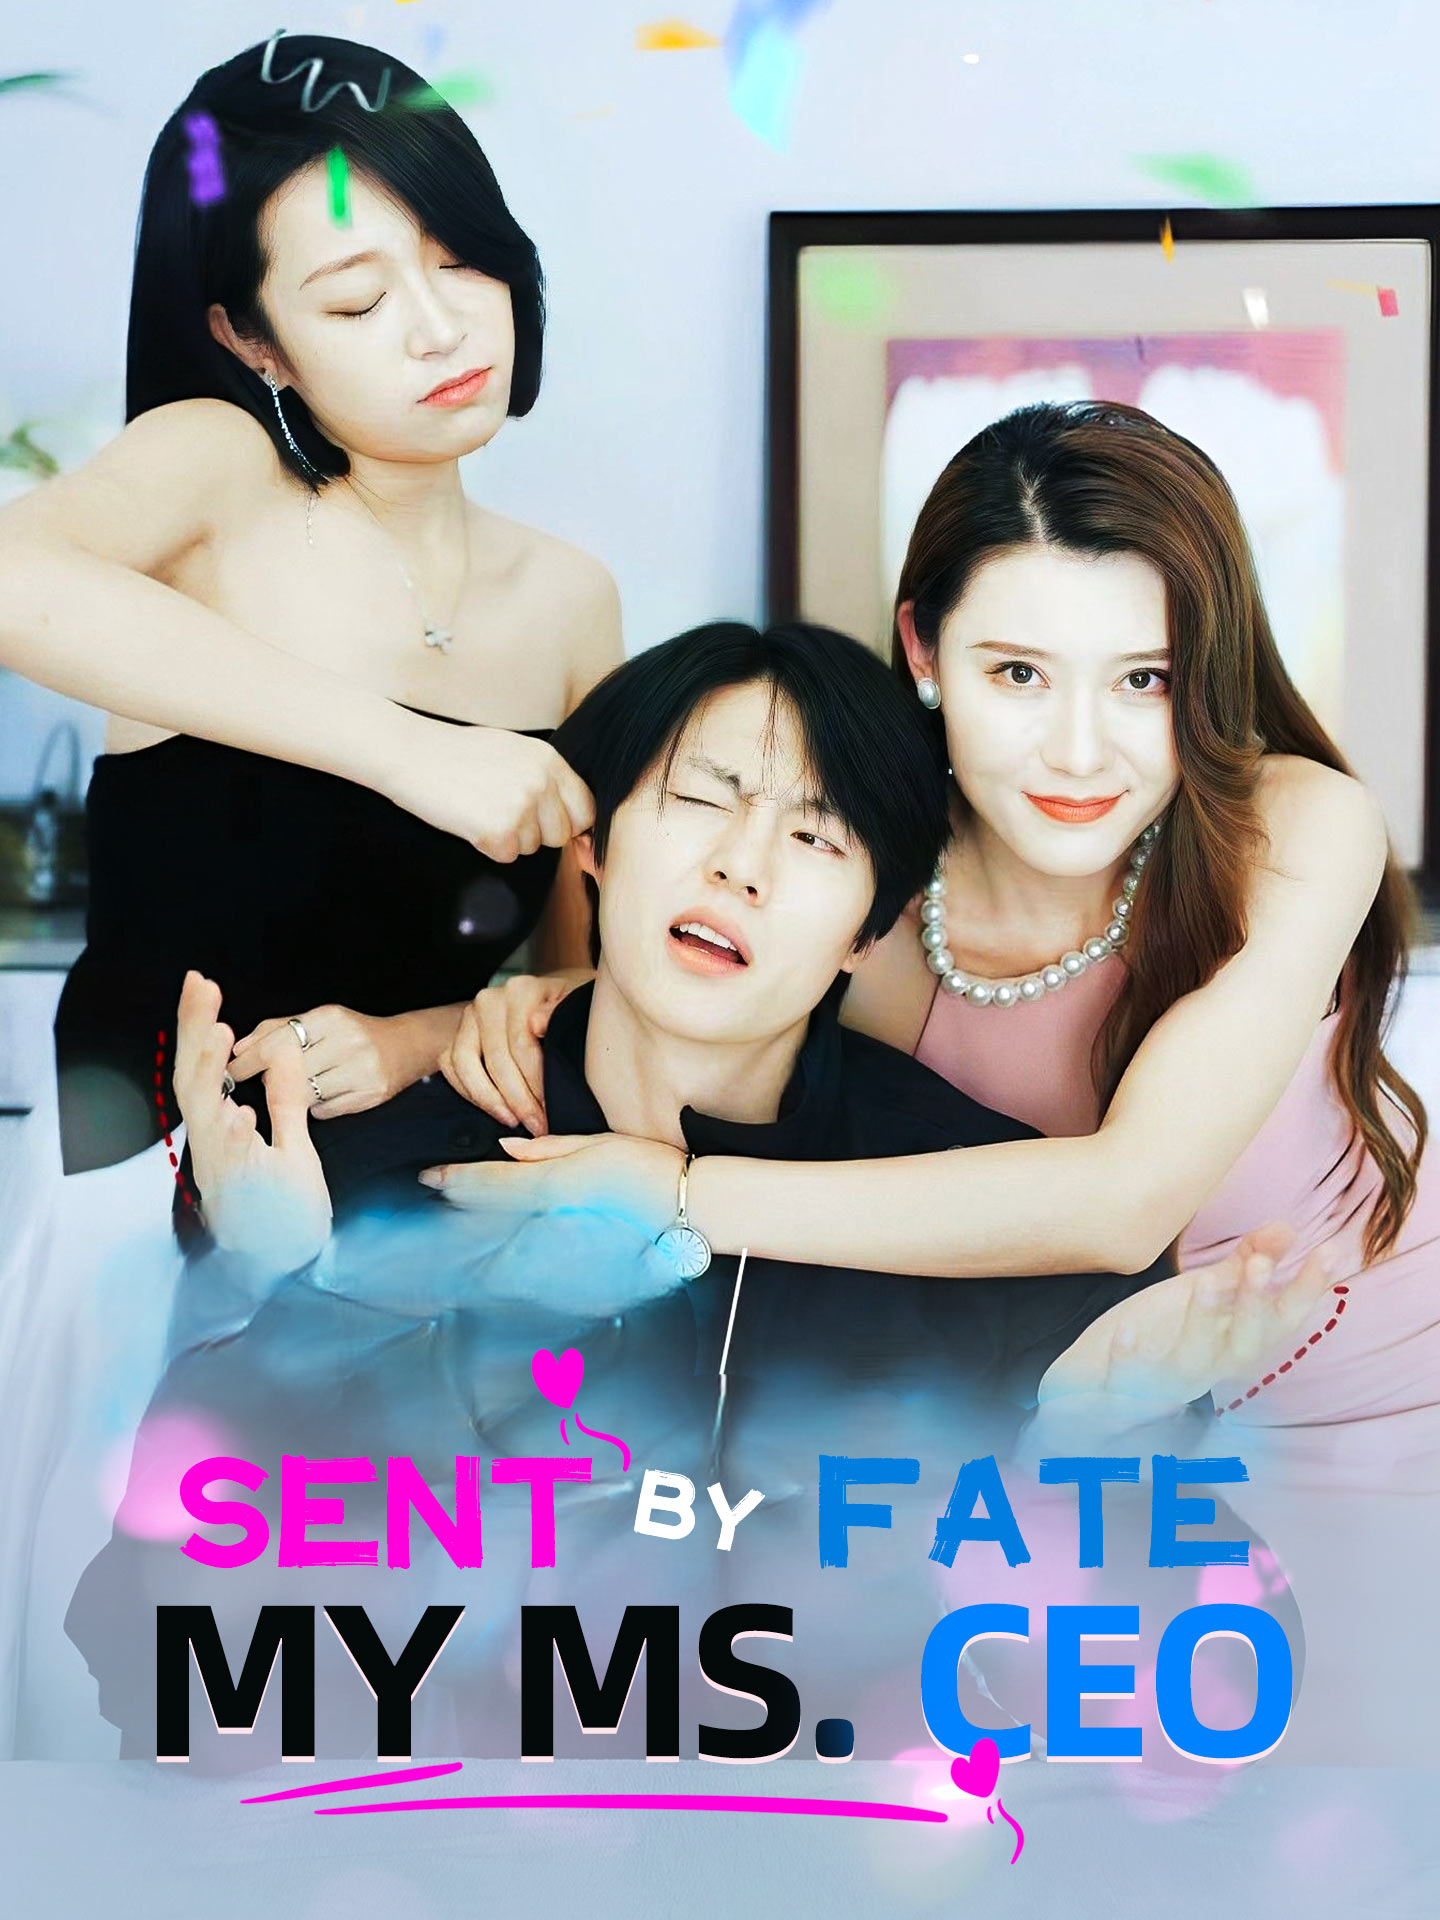 Sent by Fate: My Ms. CEO